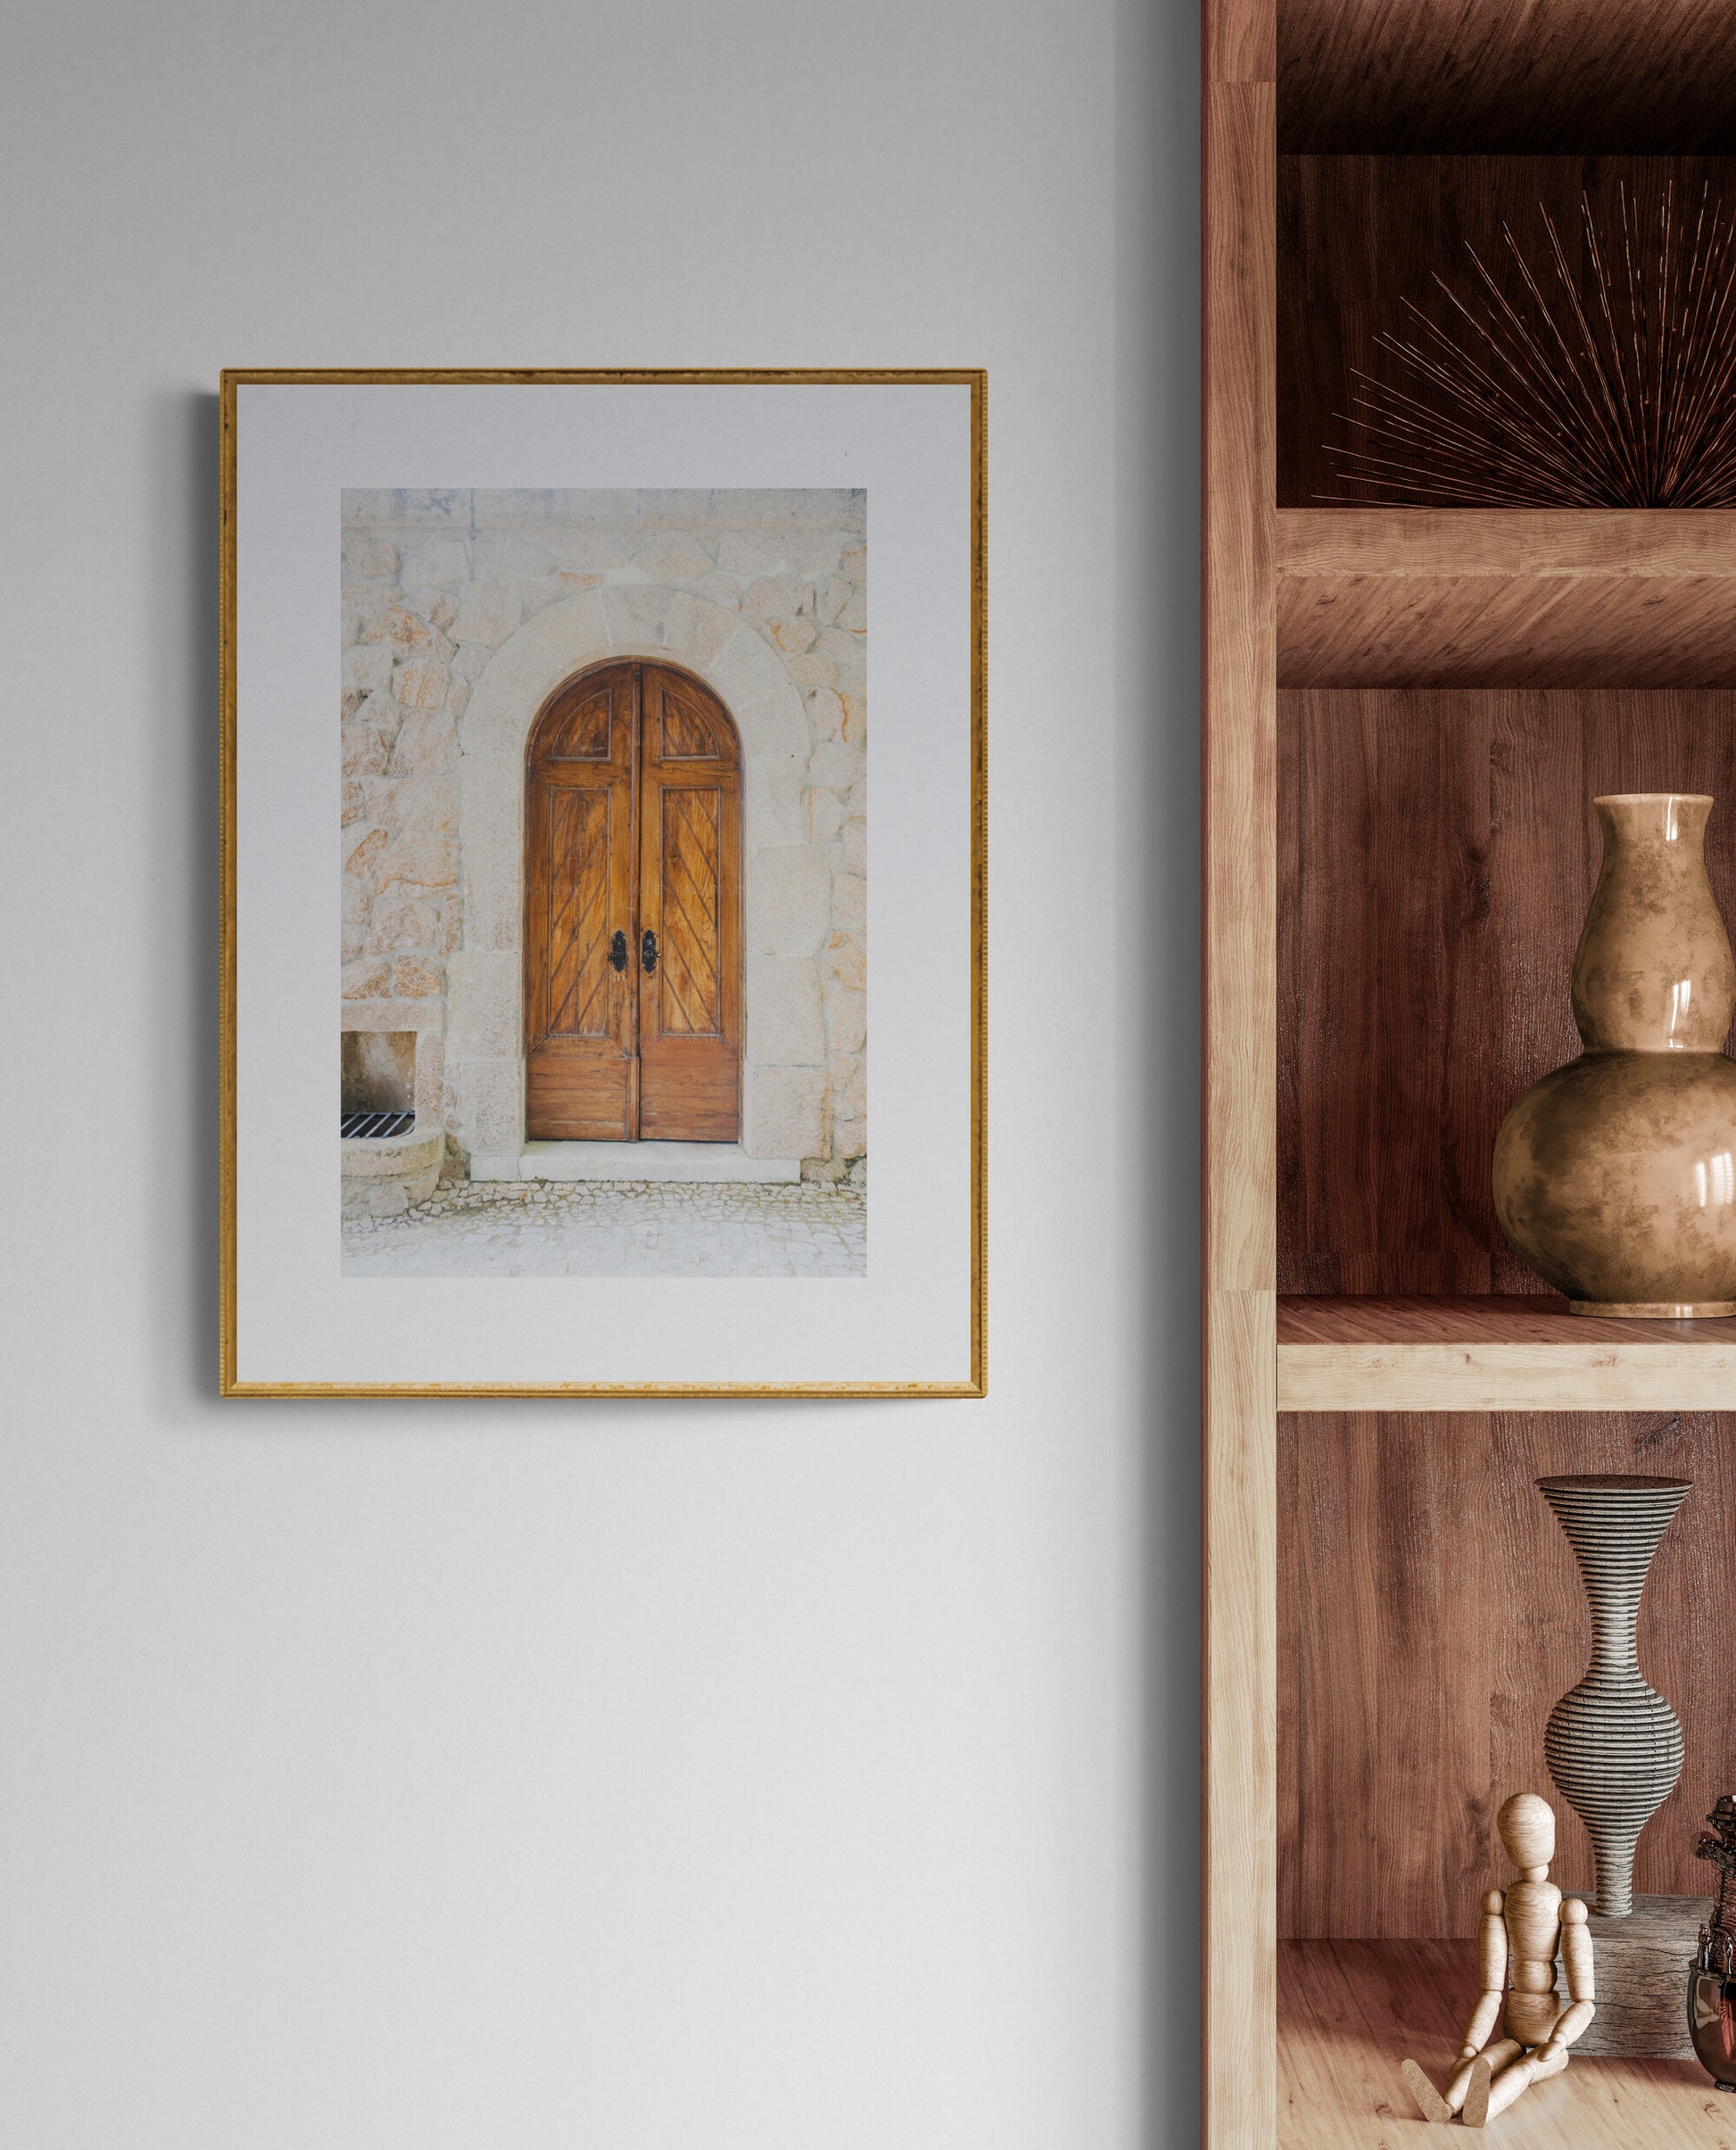 Arched wooden door photograph of sintra portugal as wall art in a living room